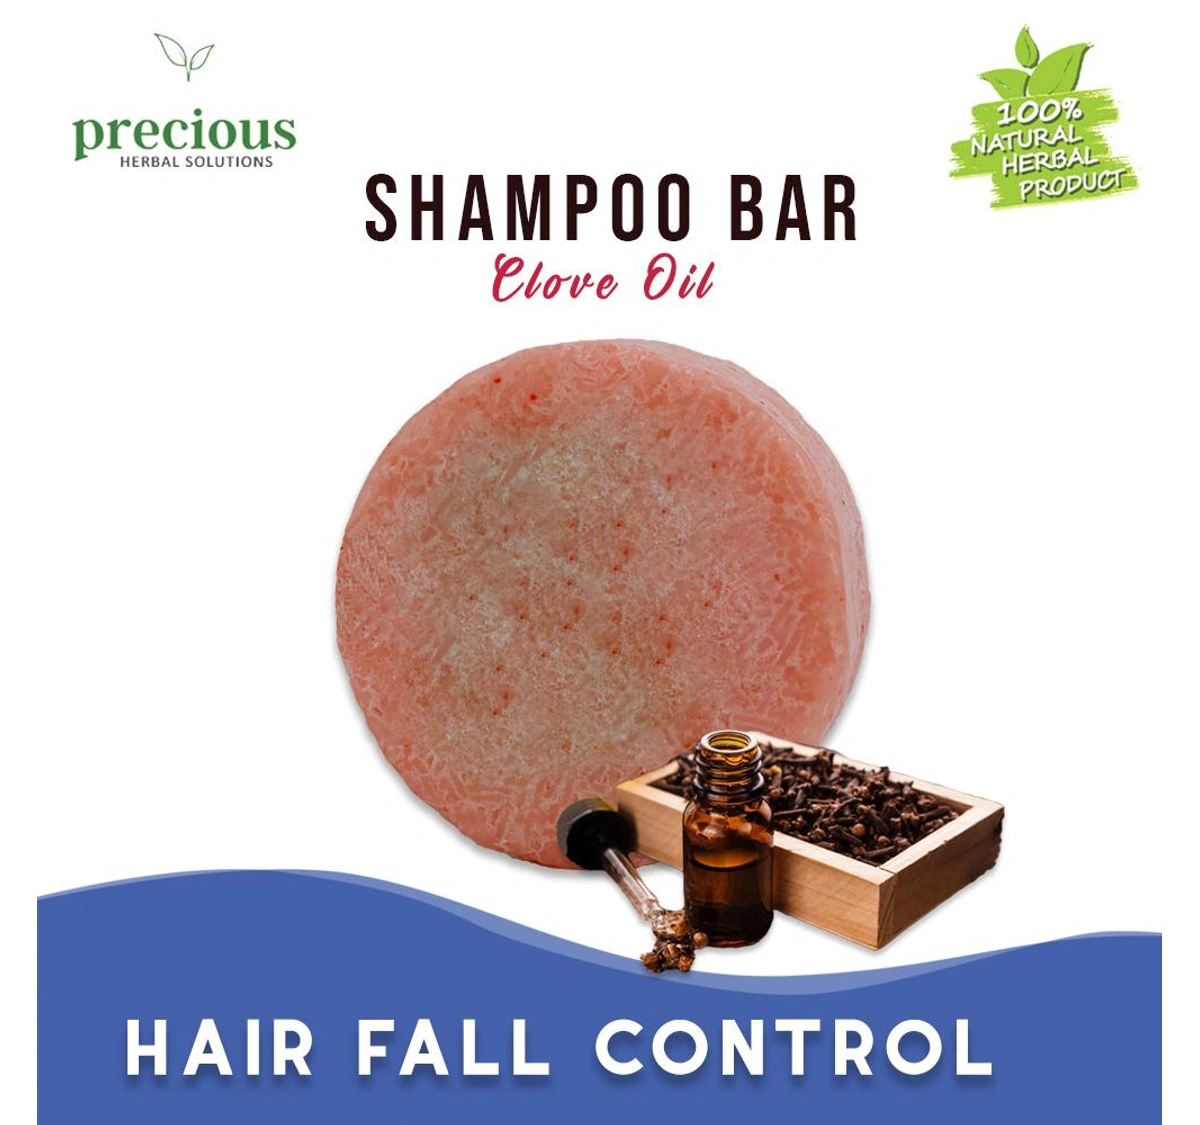 Precious Herbal Natural Shampoo Bar with Clove Oil (90g) for Hair Fall  Control, Hair Growth, Acts as a Natural Hair Conditioner, Prevents Hair Loss  and Activates Hair Color for Men and Women - |